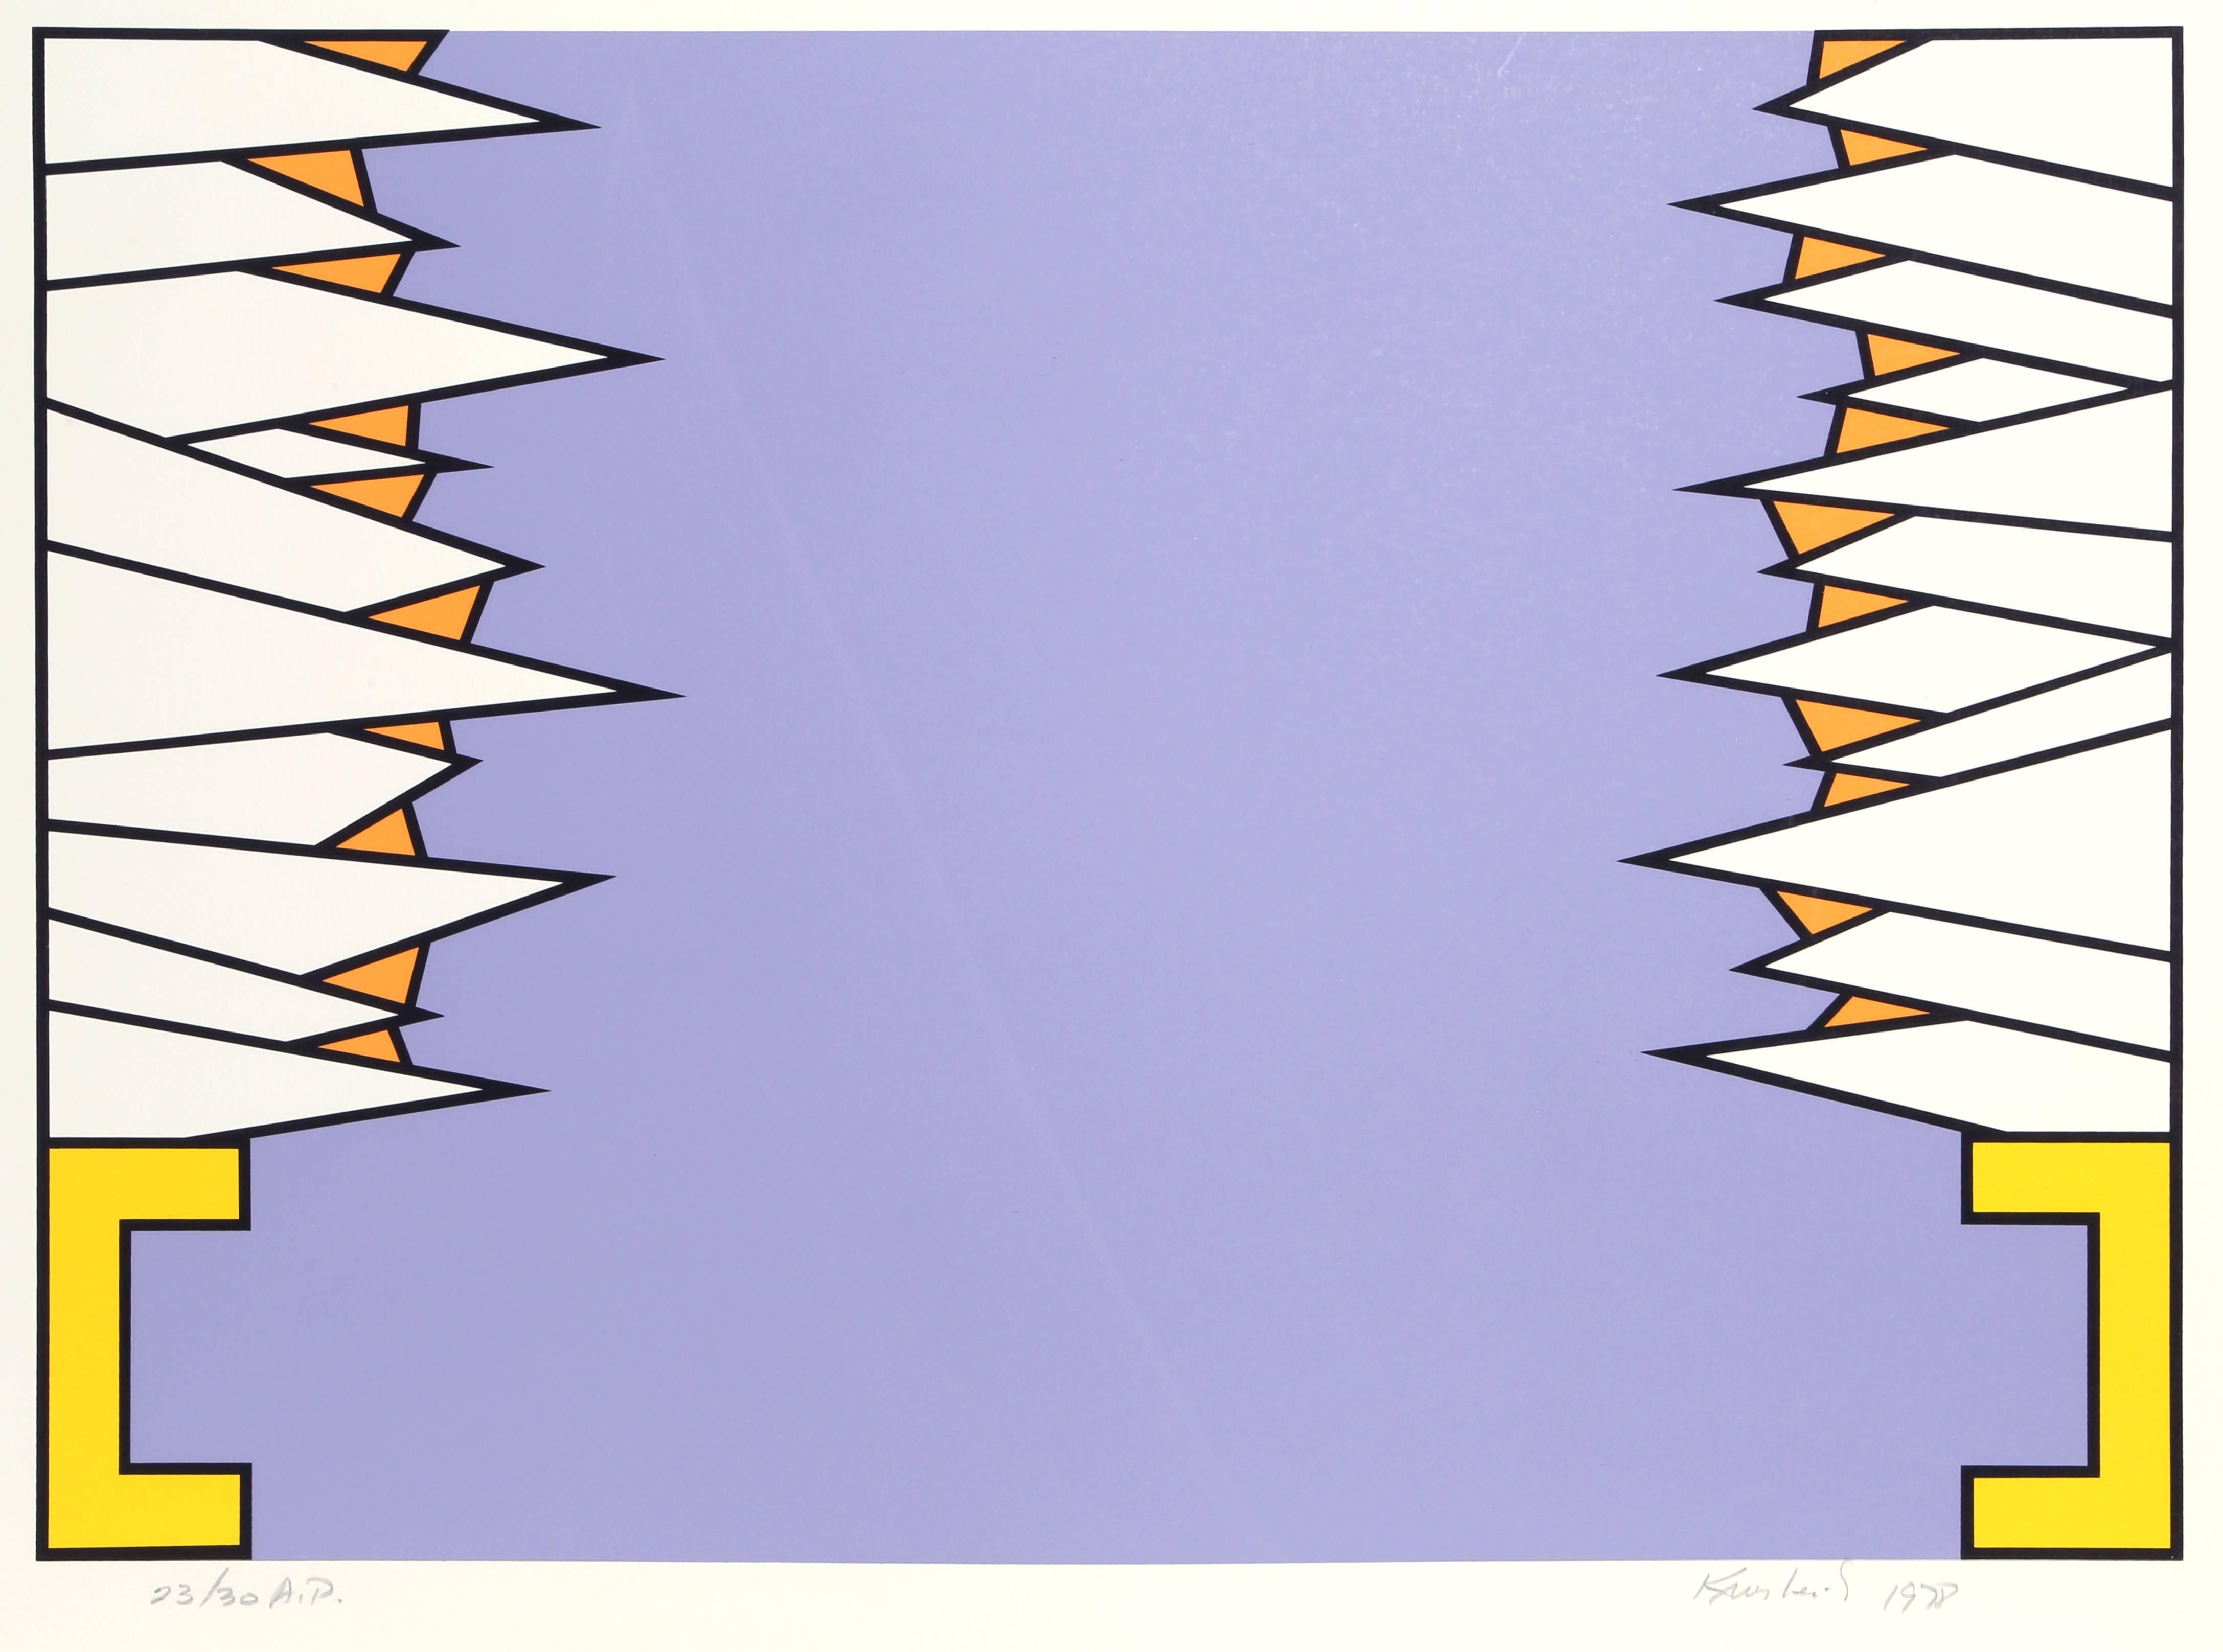 Artist: Nicholas Krushenick, American (1929 - 1999)
Title: Over the Rainbow
Year: 1978
Medium:  Silkscreen, signed and numbered in pencil 
Edition: 200; AP 30 
Paper Size:  27 x 37.5 inches (68.58 x 92.25 cm)